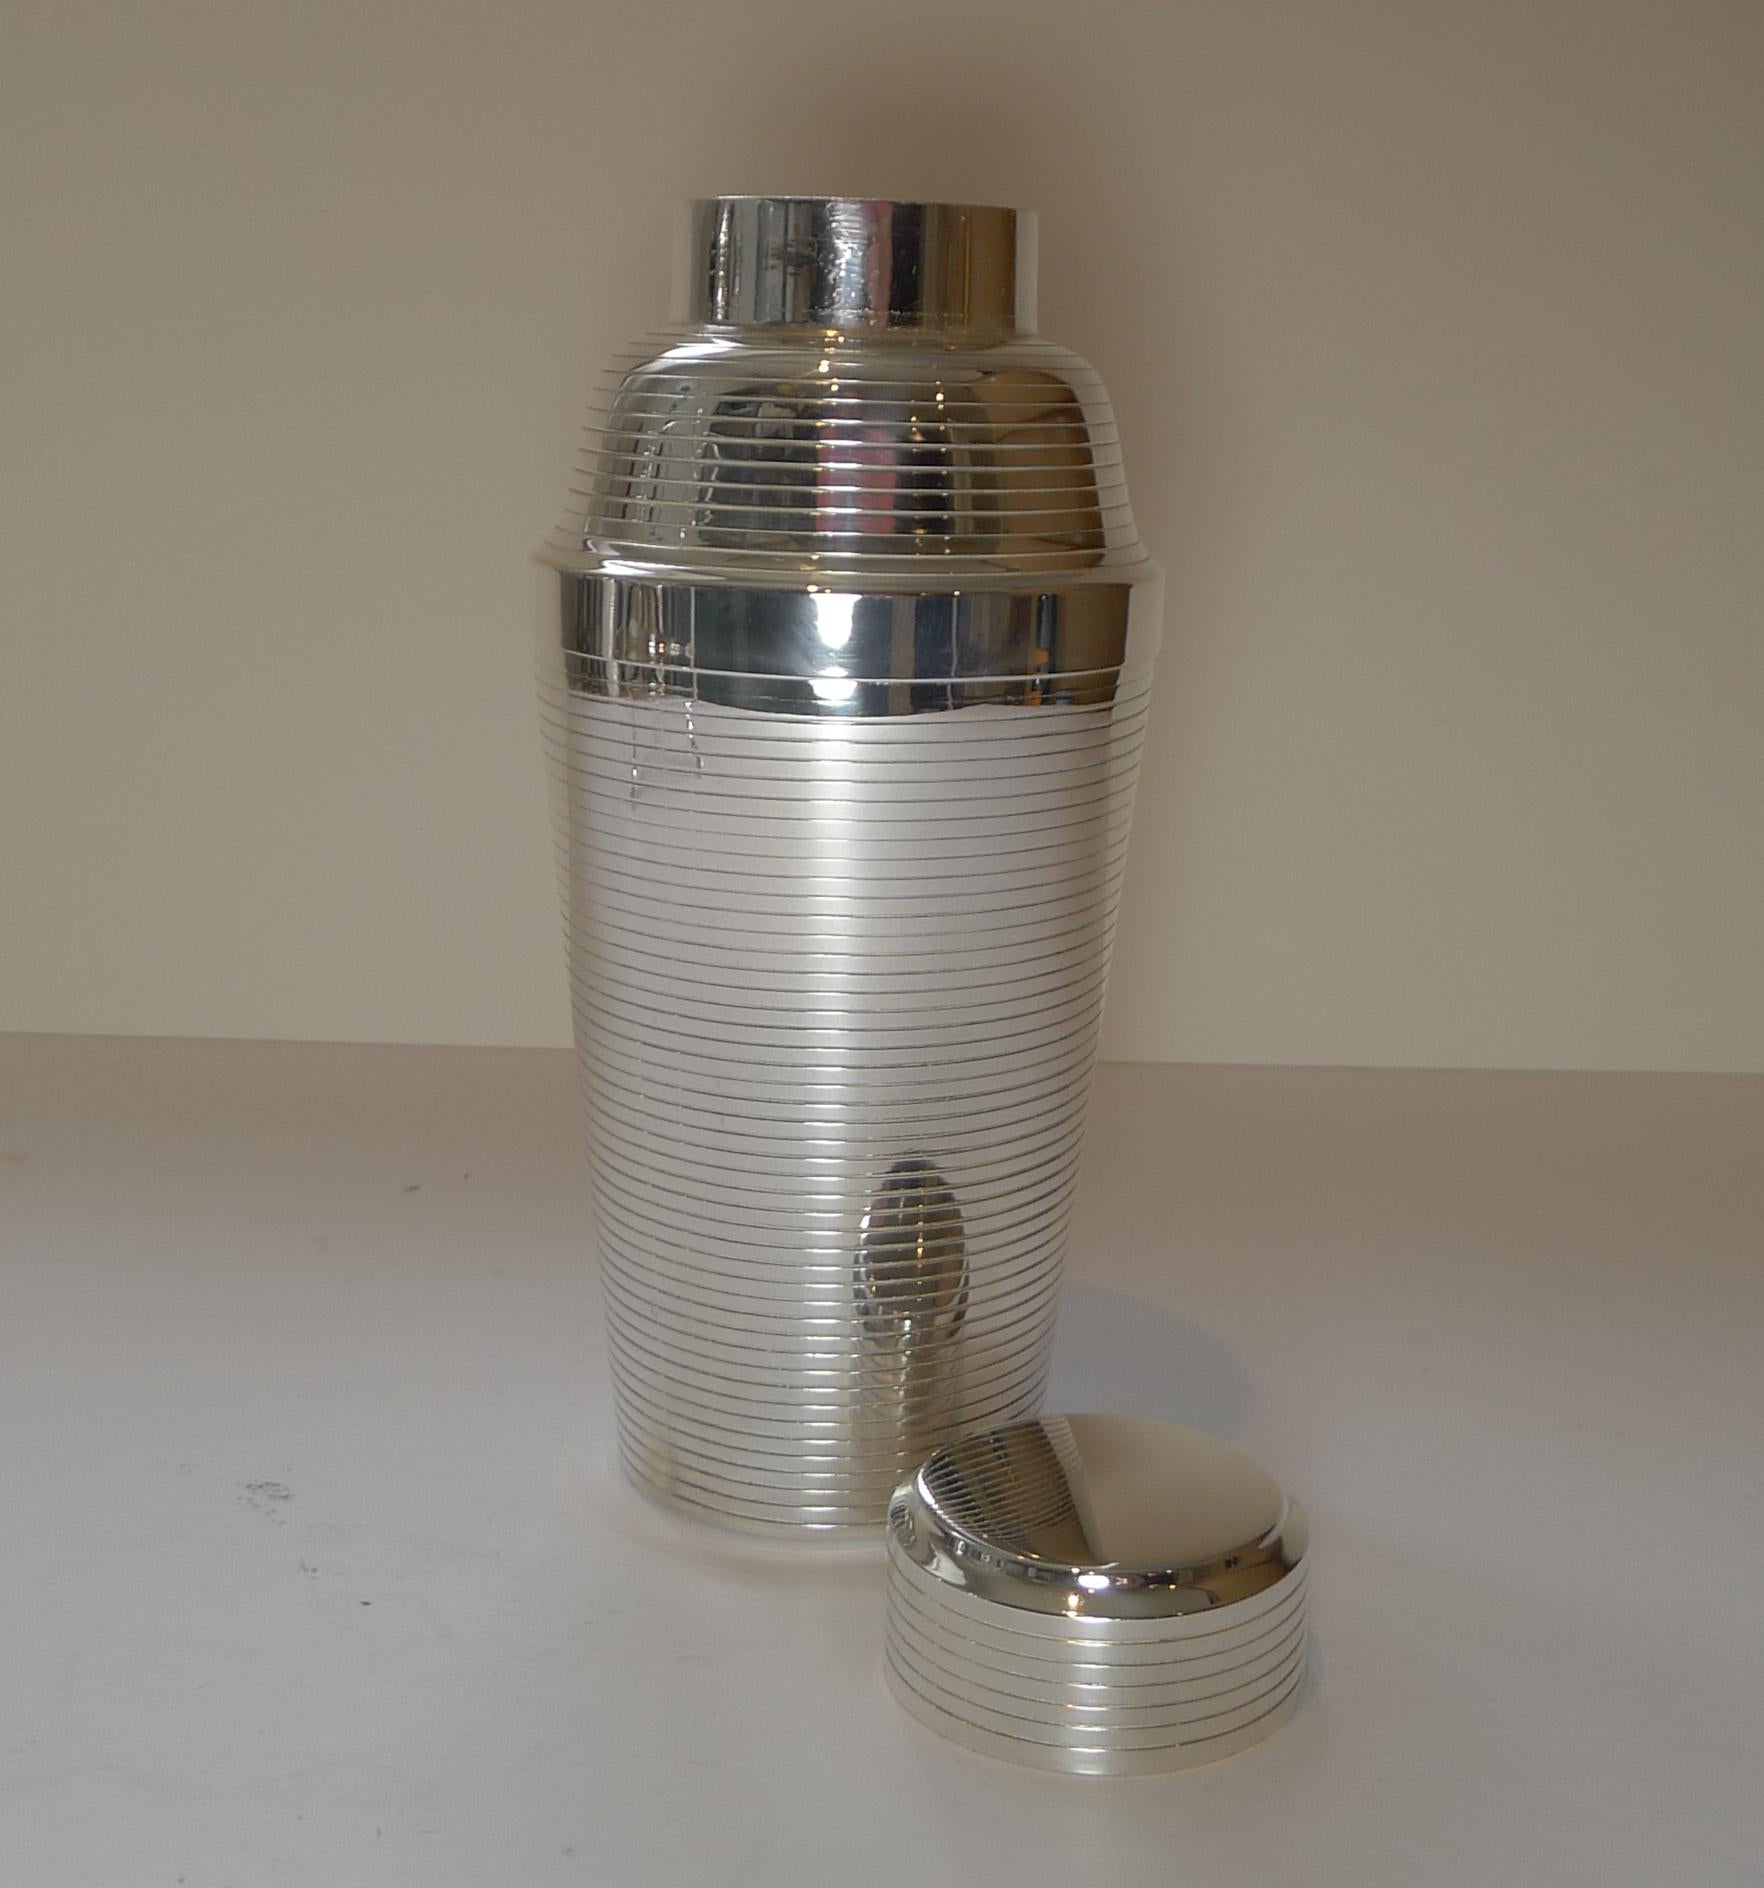 A handsome streamliner cocktail shaker by the well renowned Carl Deffner of Esslingen.

Just back from our silversmith's workshop where it has been professionally cleaned and polished, restoring it to it's former glory; minor interior wear